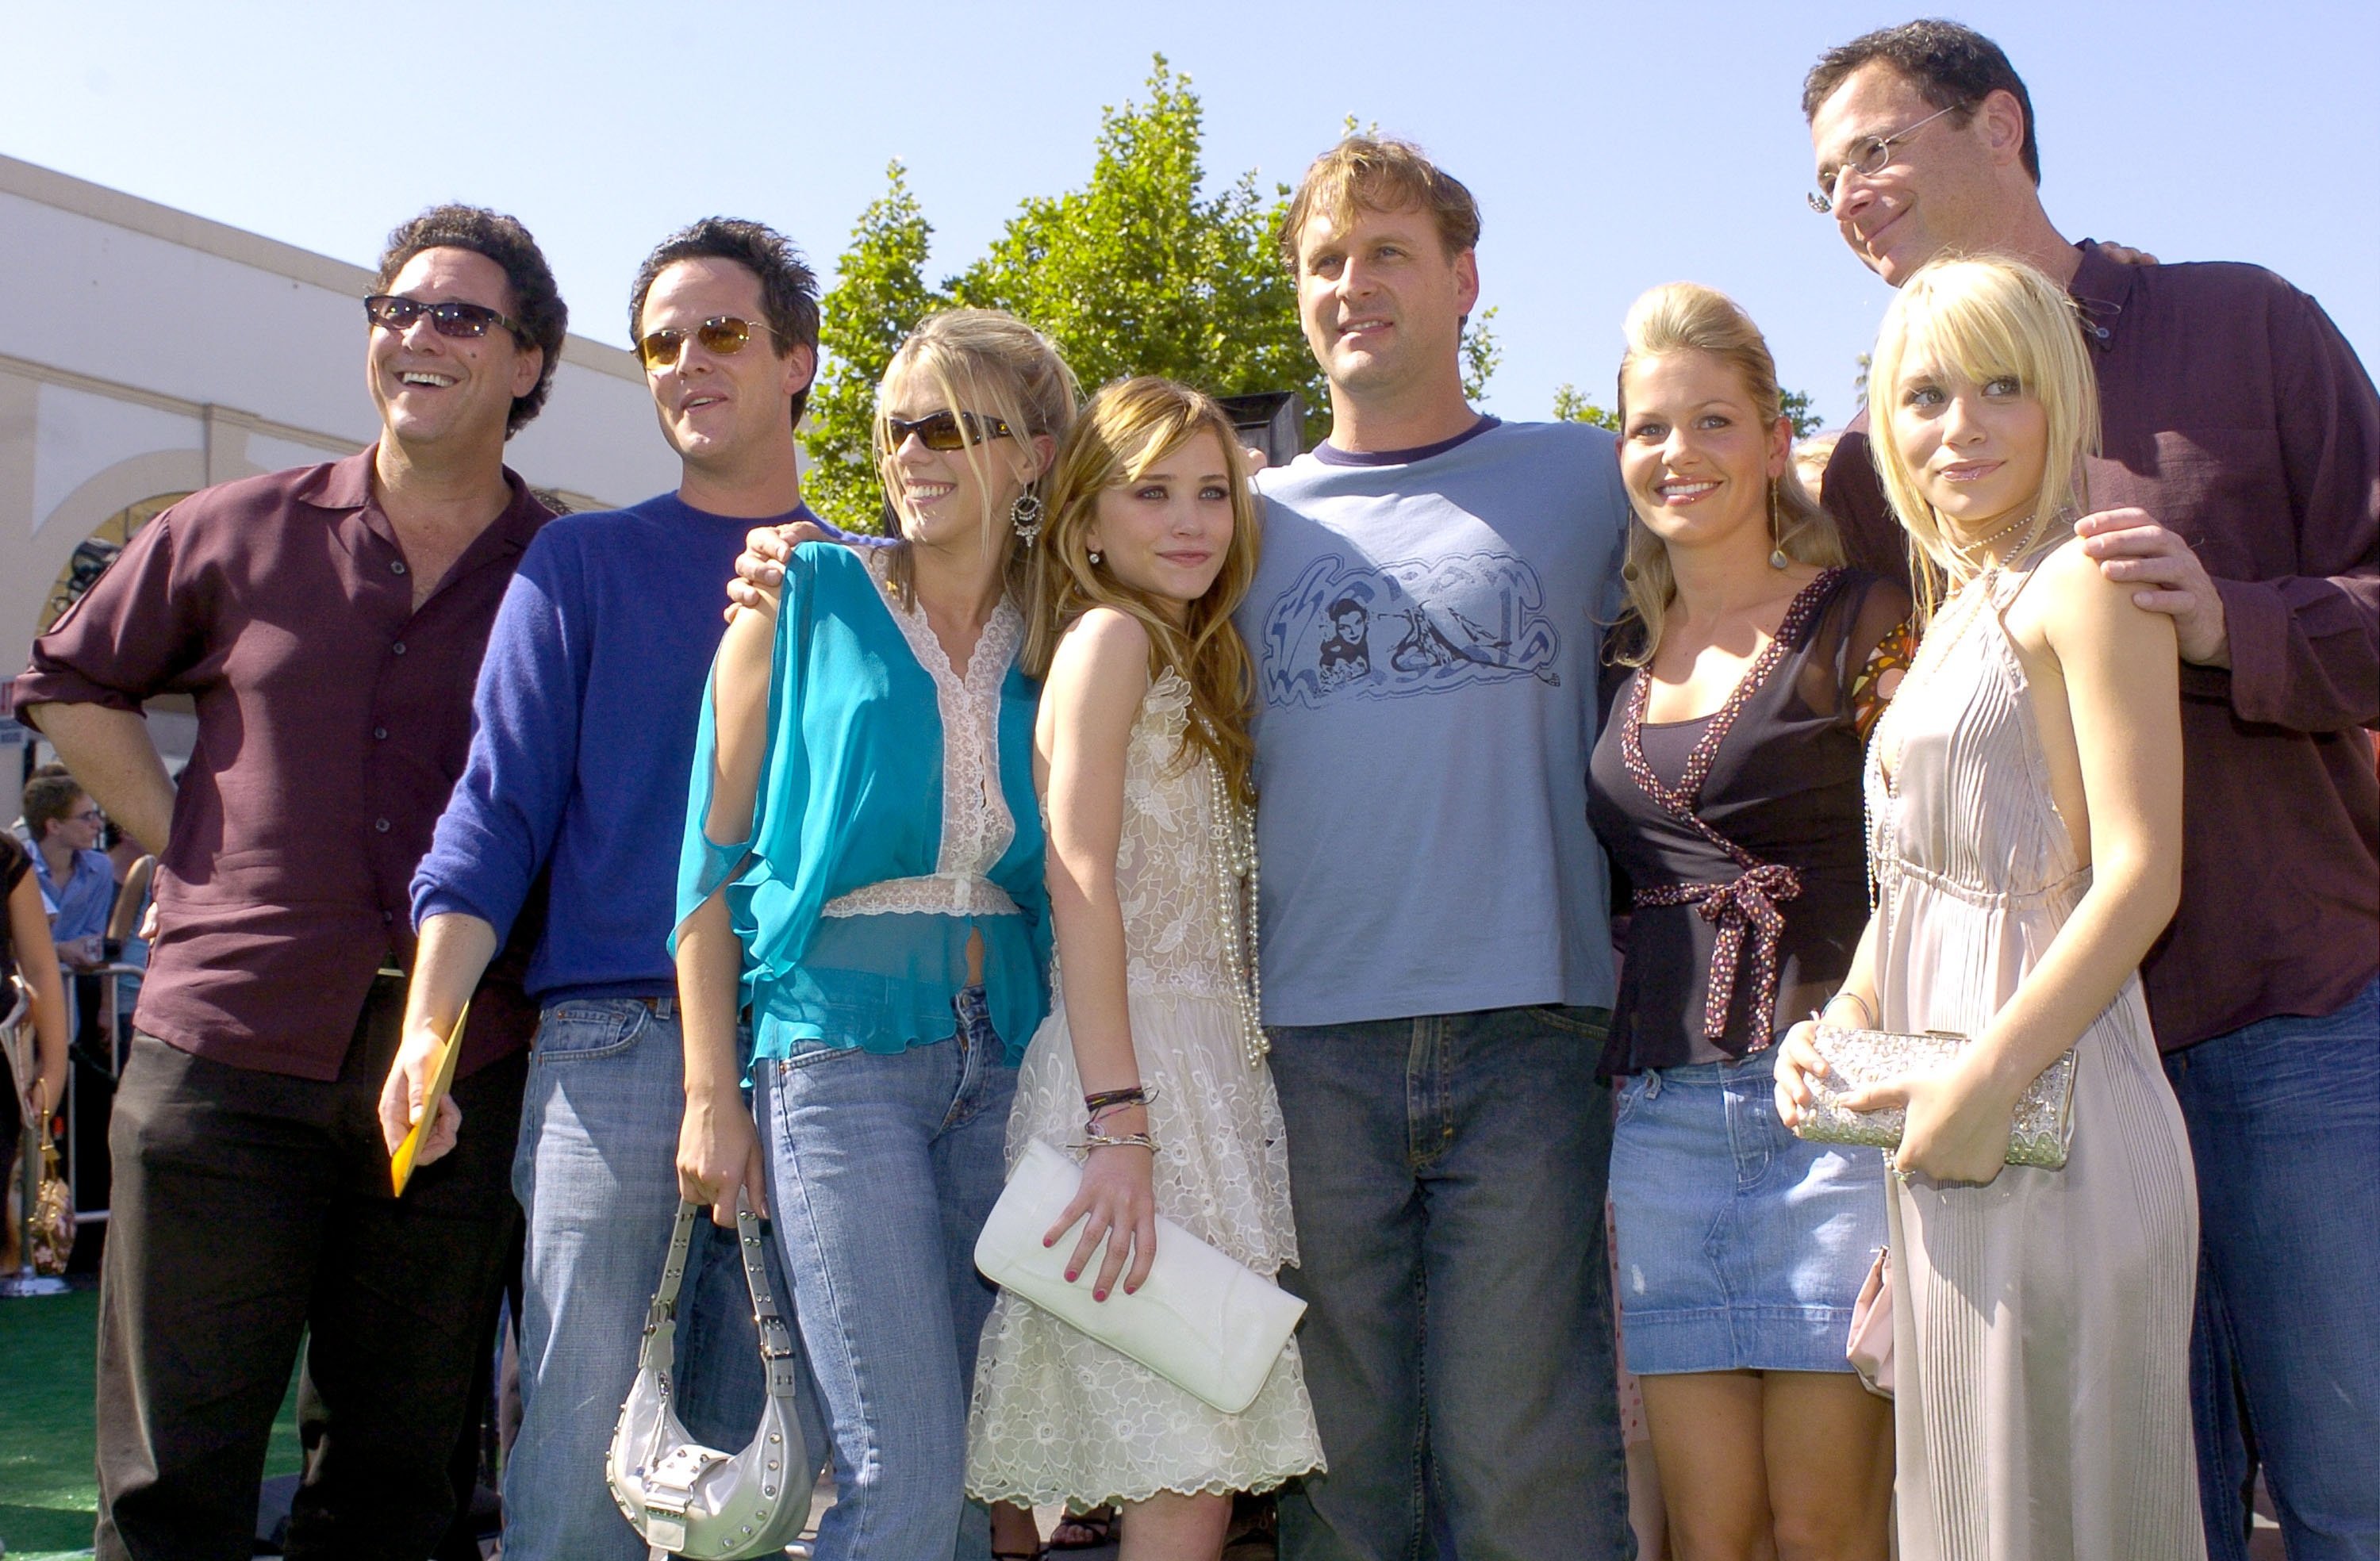 Cast of 'Full House' reunion with Scott Weinger, Jodie Sweetin, Mary-Kate Olsen, Dave Coulier, Candace Cameron Bure, Bob Saget and Ashley Olsen